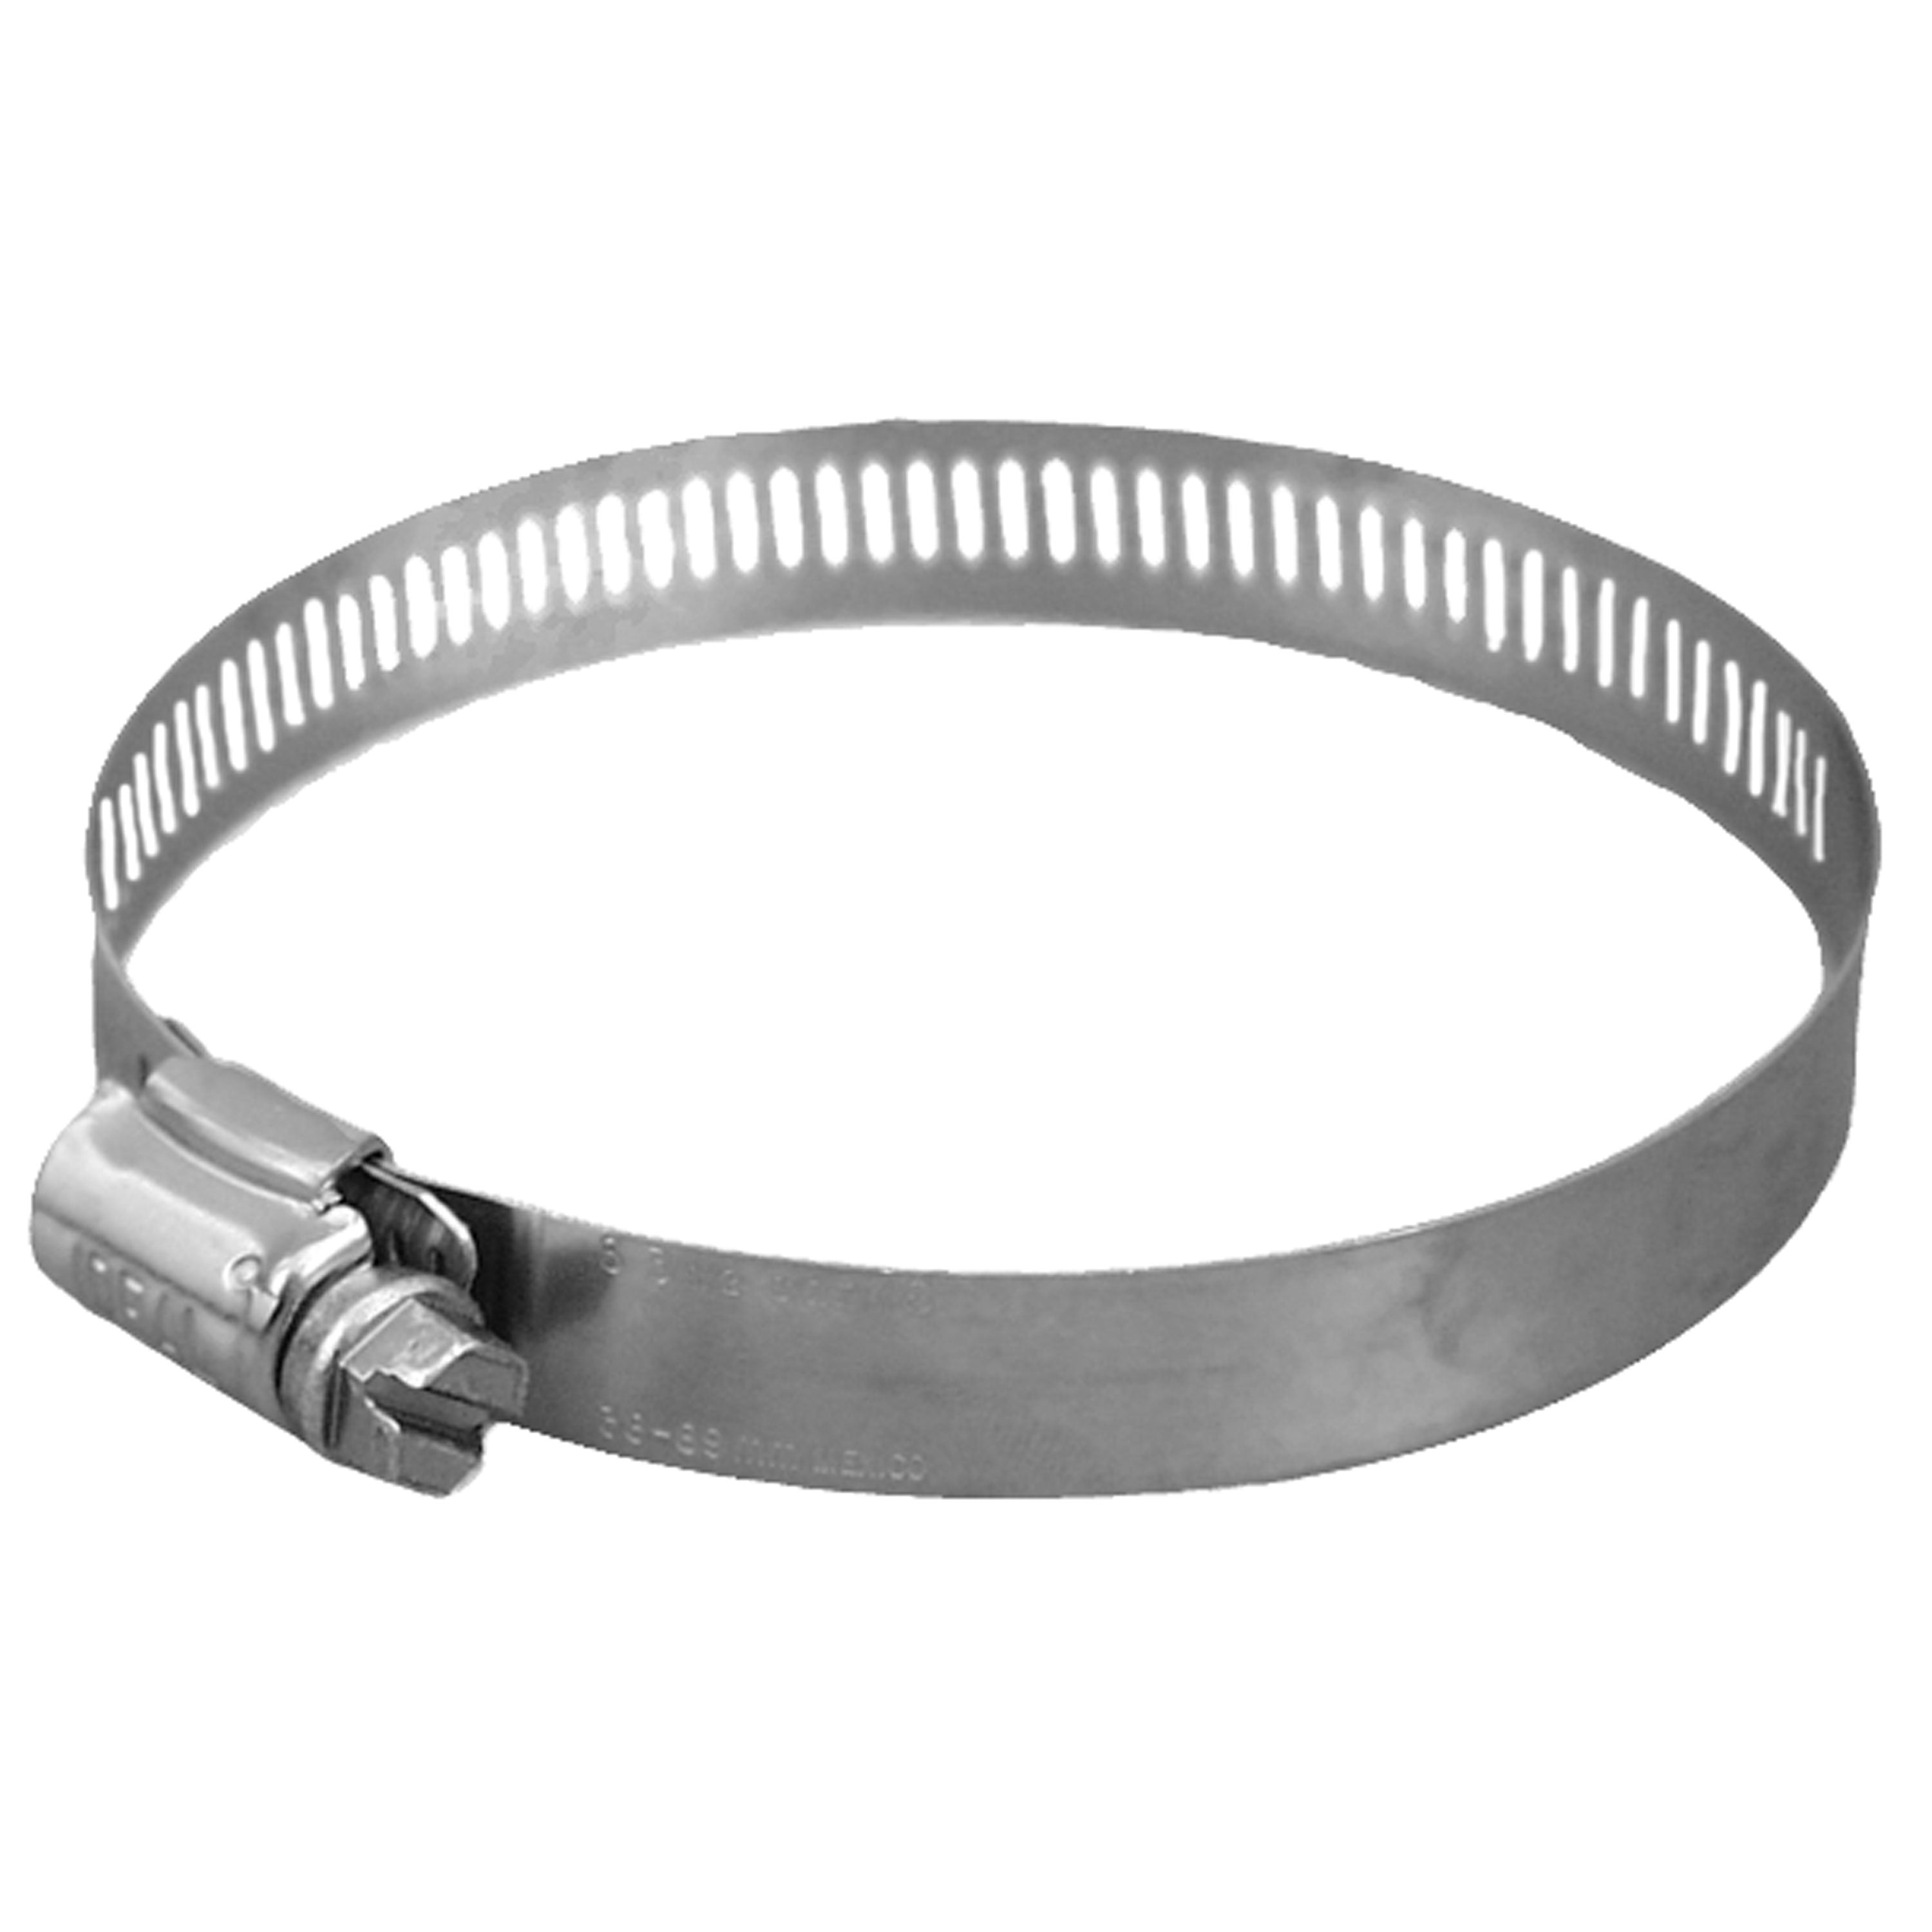 Valterra H03-0015 Stainless Steel Micro Hose Clamp - #4, 1/4" x 5/8", Pack of 10